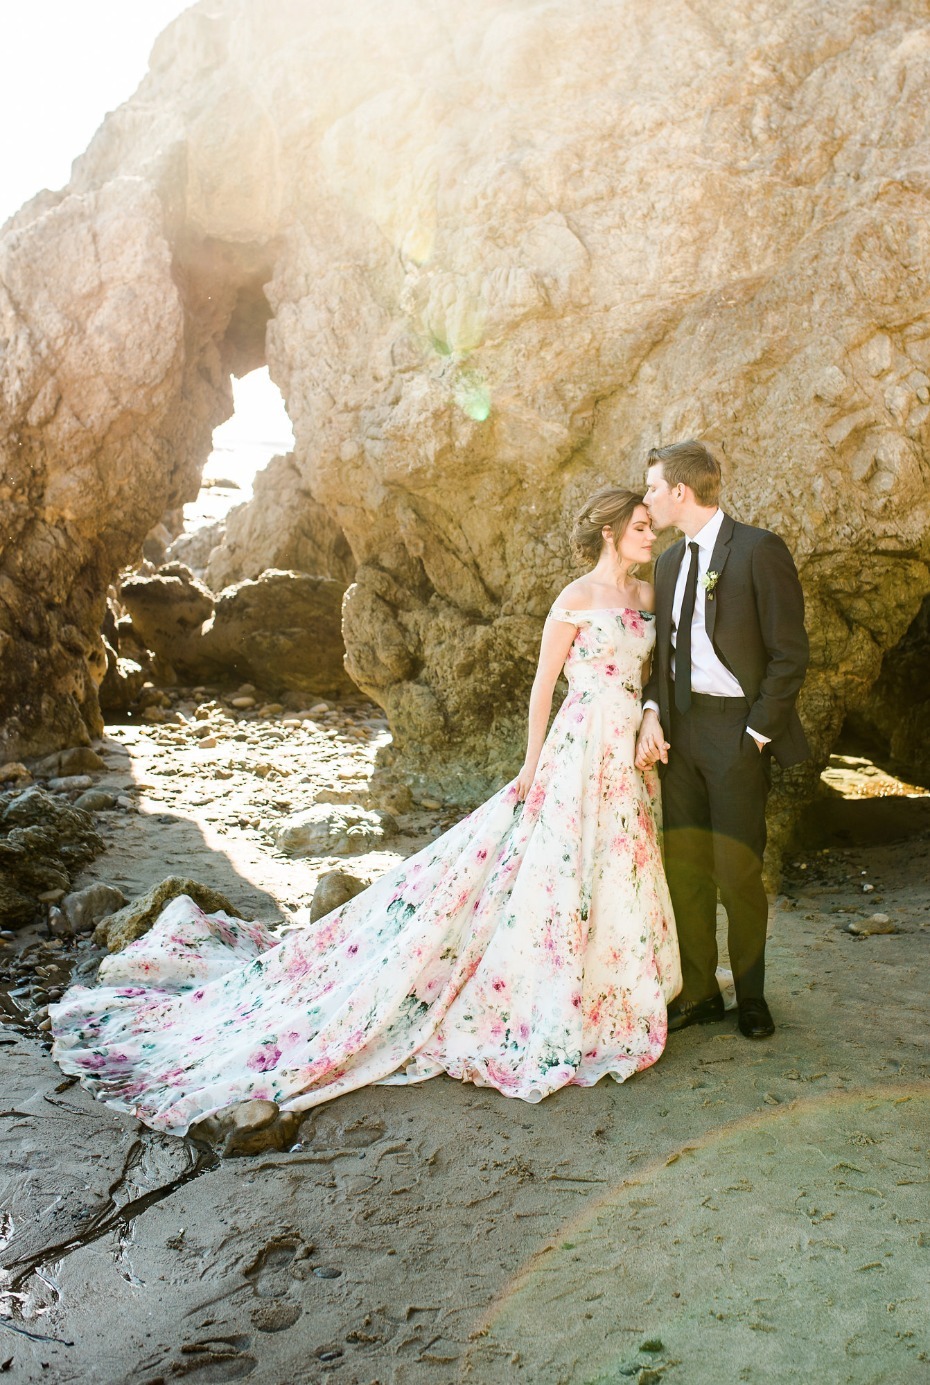 It's All About Love And Support At This Beach Wedding Shoot